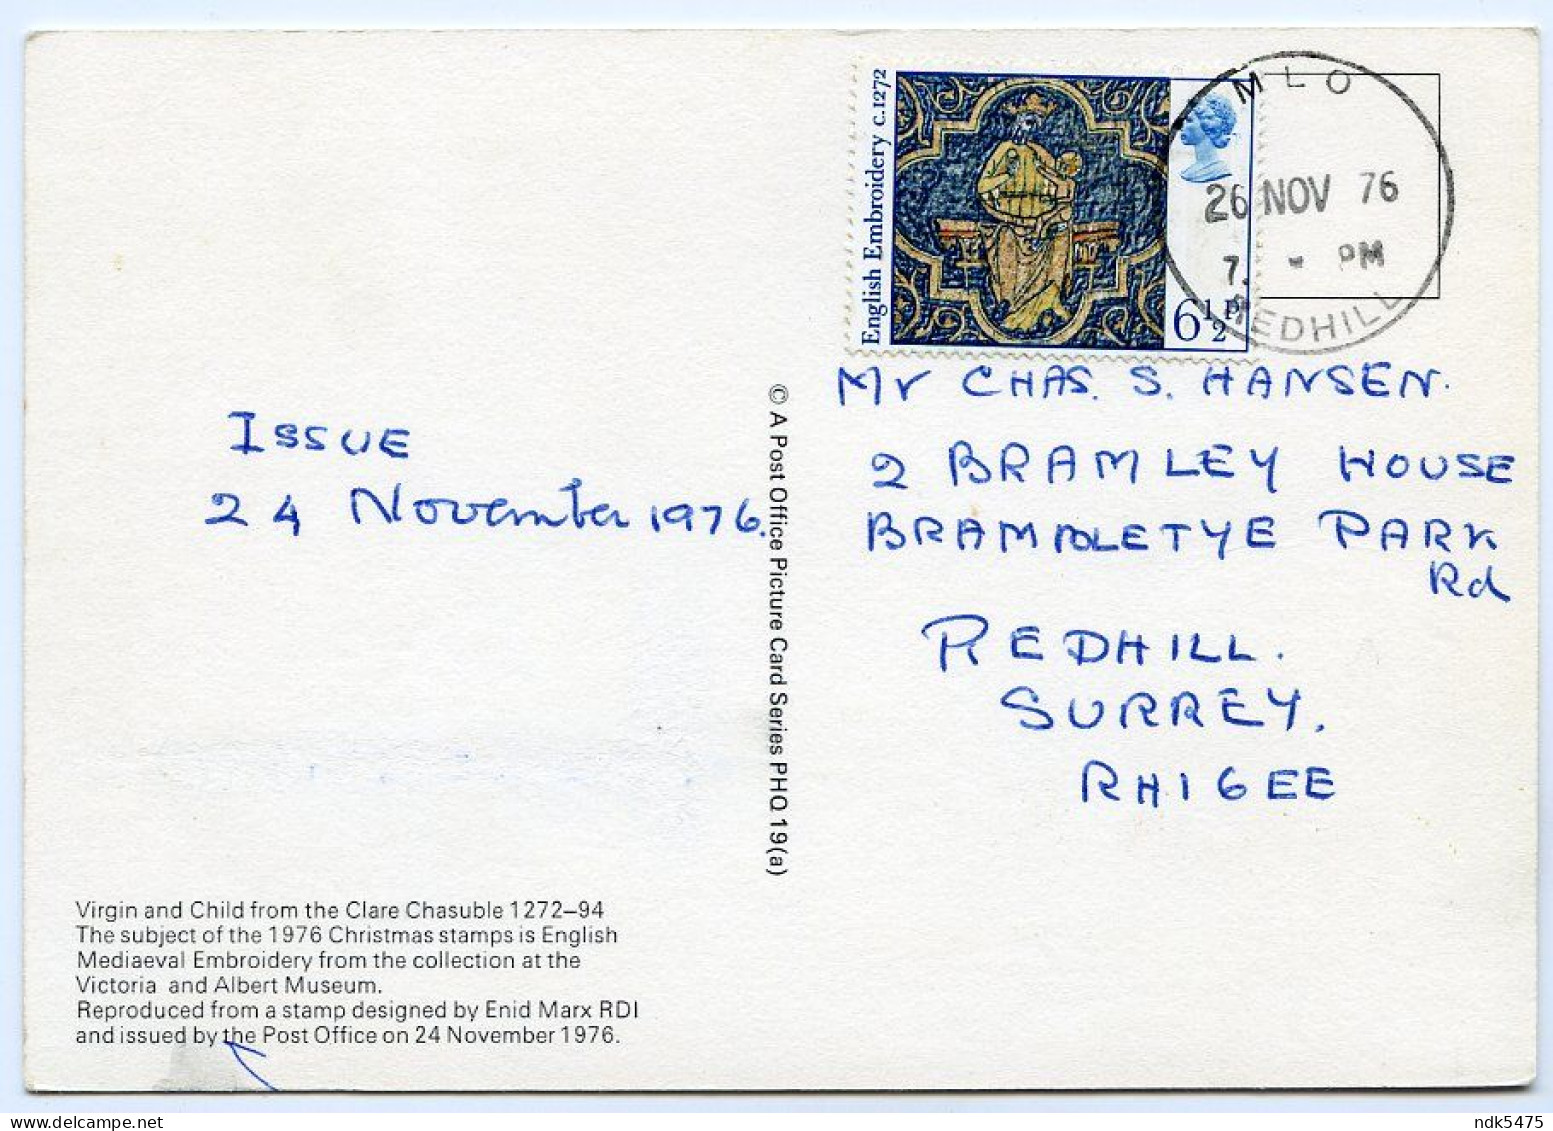 POSTMARK : MLO REDHILL, 1976 / VICTORIA AND ALBERT MUSEUM PHQ - VIRGIN AND CHILD  (10 X 15cms Approx.) - PHQ Karten